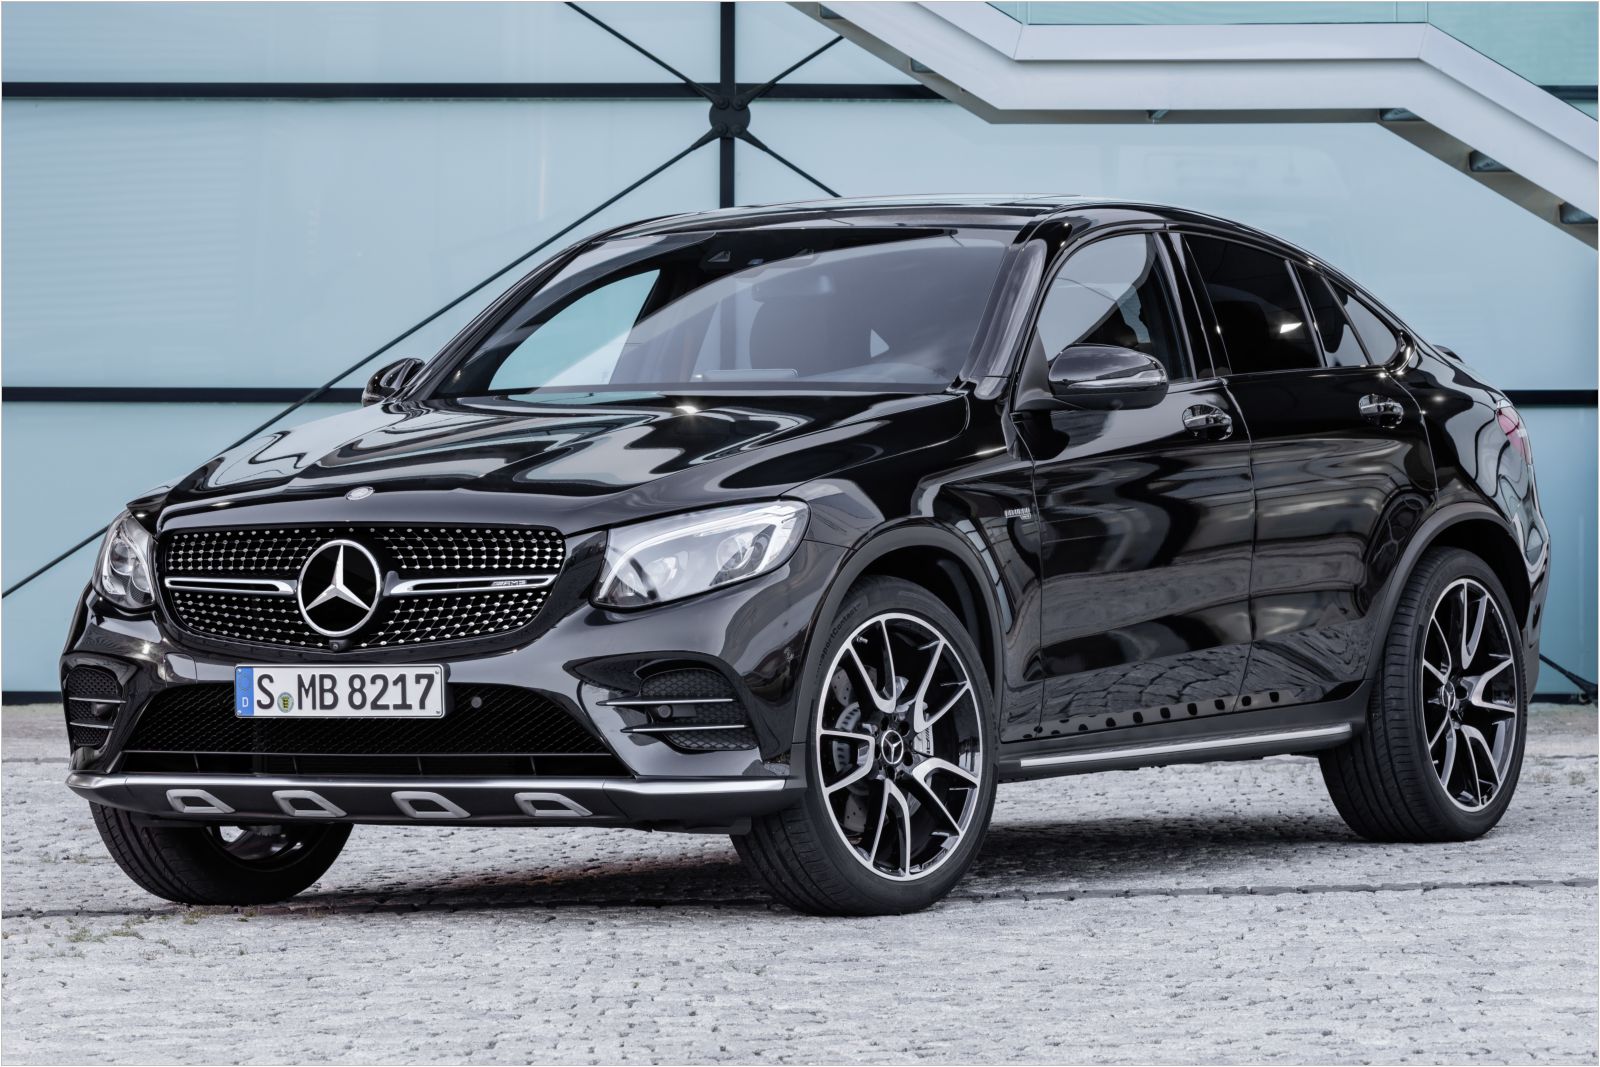 Mercedes-Benz GLC43 AMG 4Matic Coupe, 1600x1067px, img-1